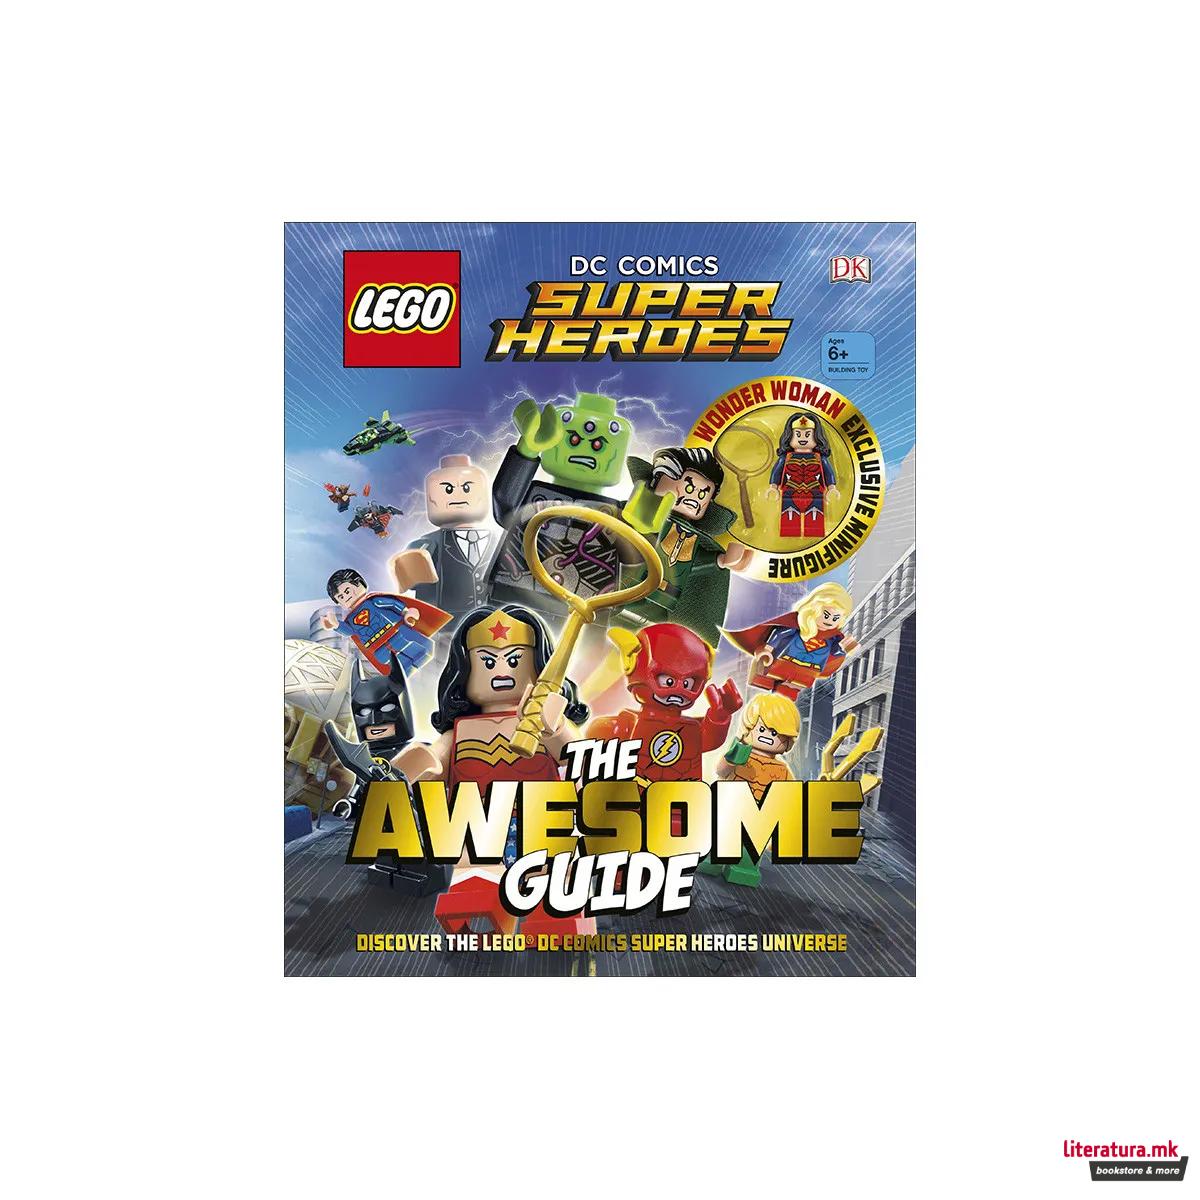 LEGO (R) DC Comics Super Heroes The Awesome Guide : With Exclusive Wonder Woman Minifigure 